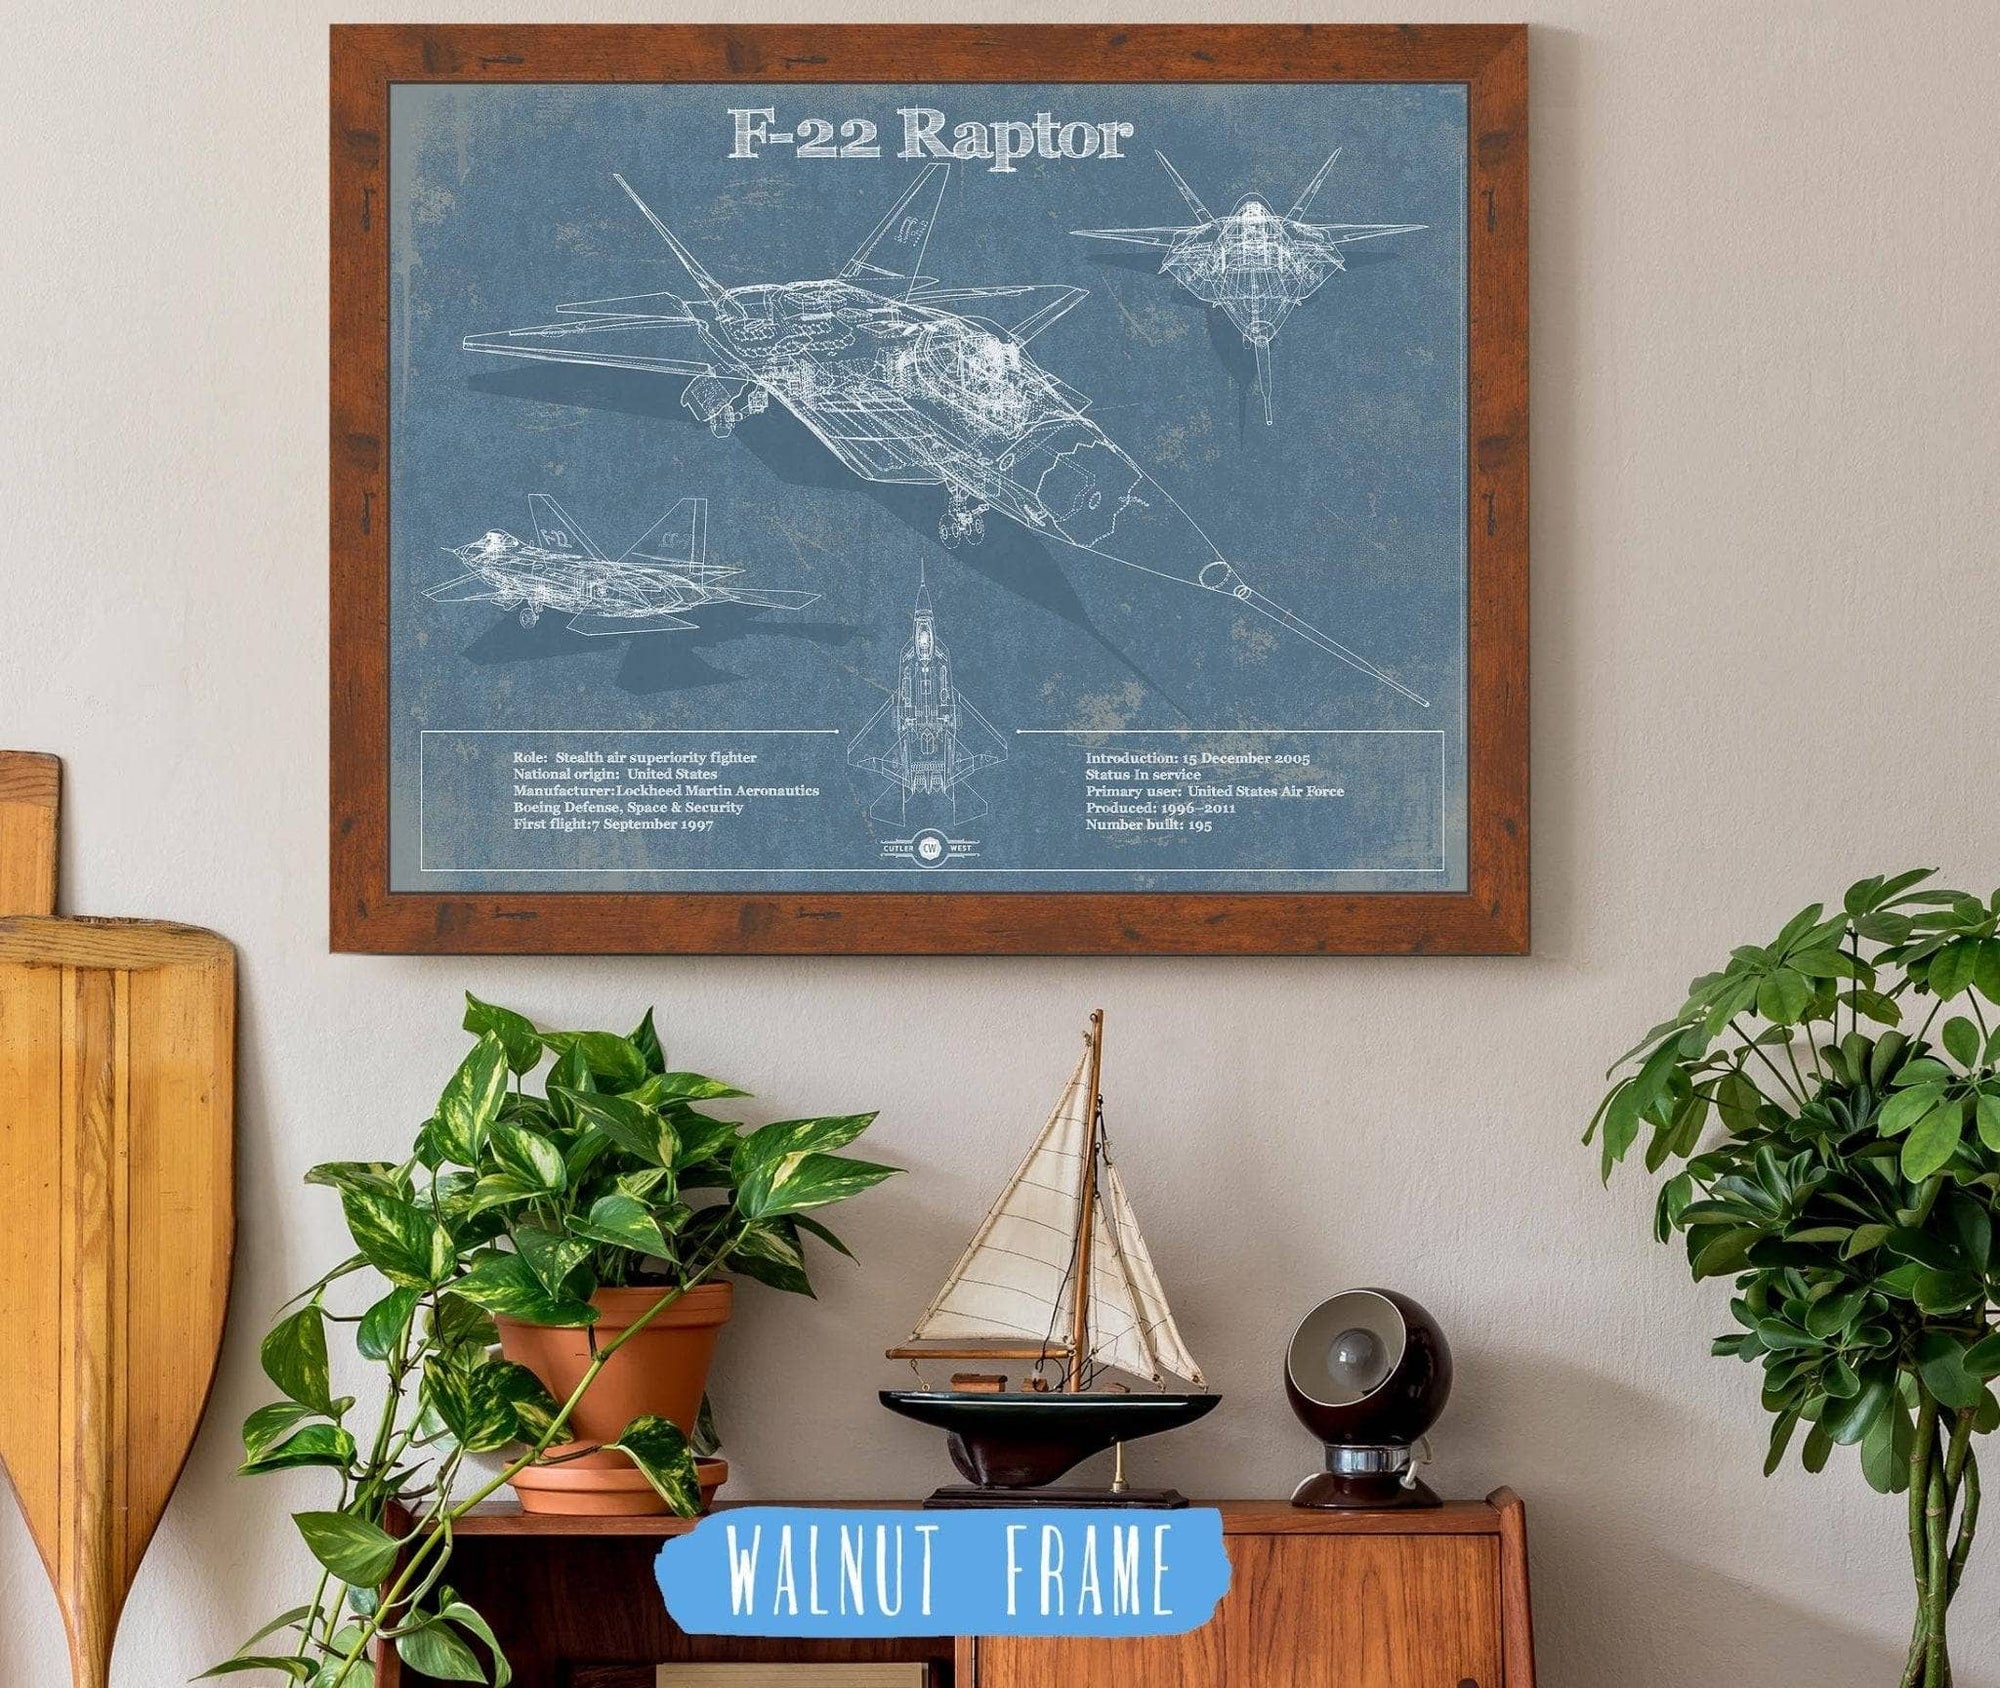 Cutler West Best Selling Collection 14" x 11" / Walnut Frame F-22 Raptor Aviation Blueprint Military Print - Custom Name and Squadron Text 803915045-TOP